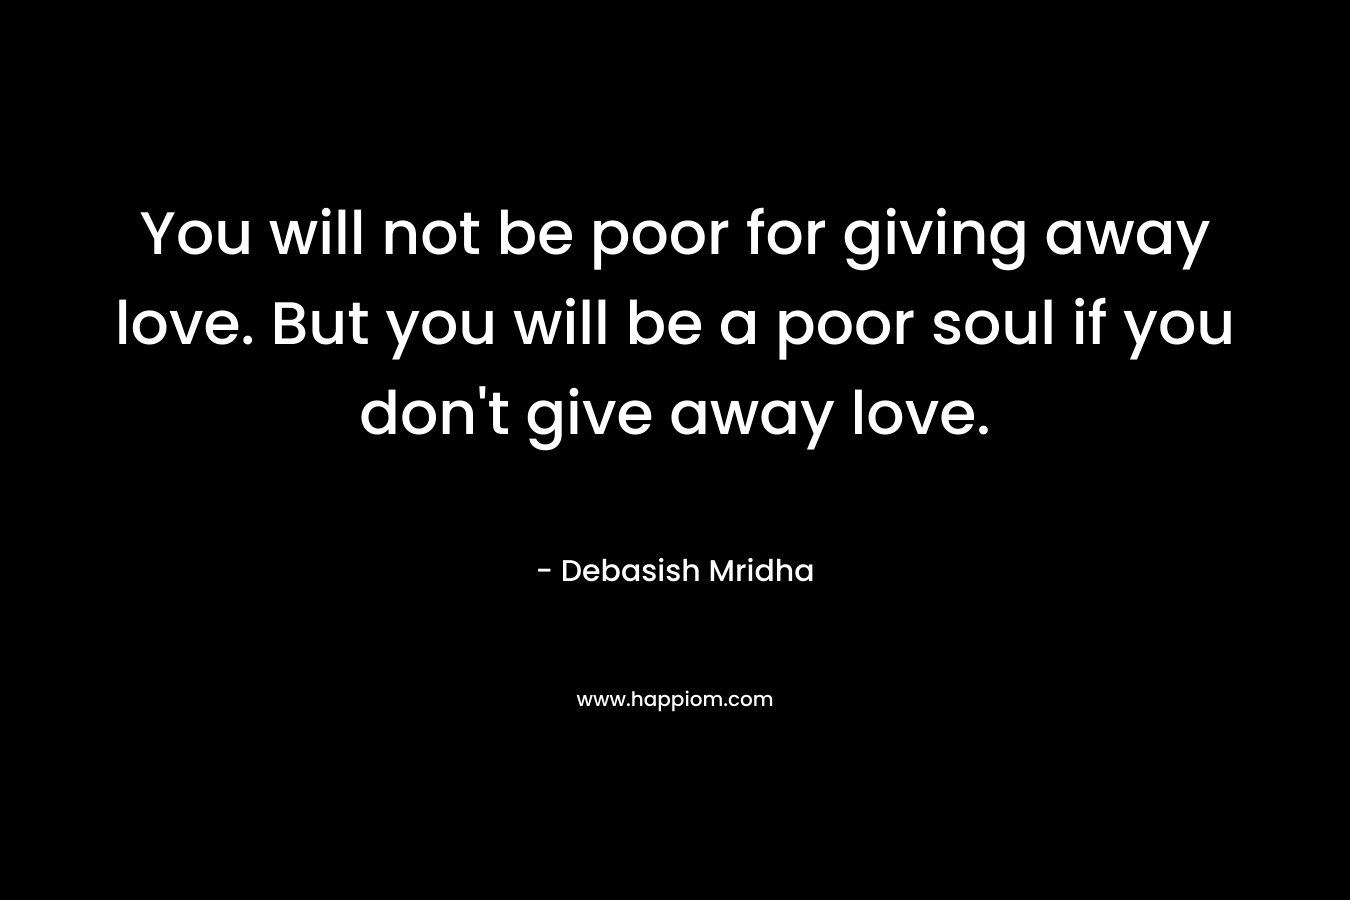 You will not be poor for giving away love. But you will be a poor soul if you don't give away love.